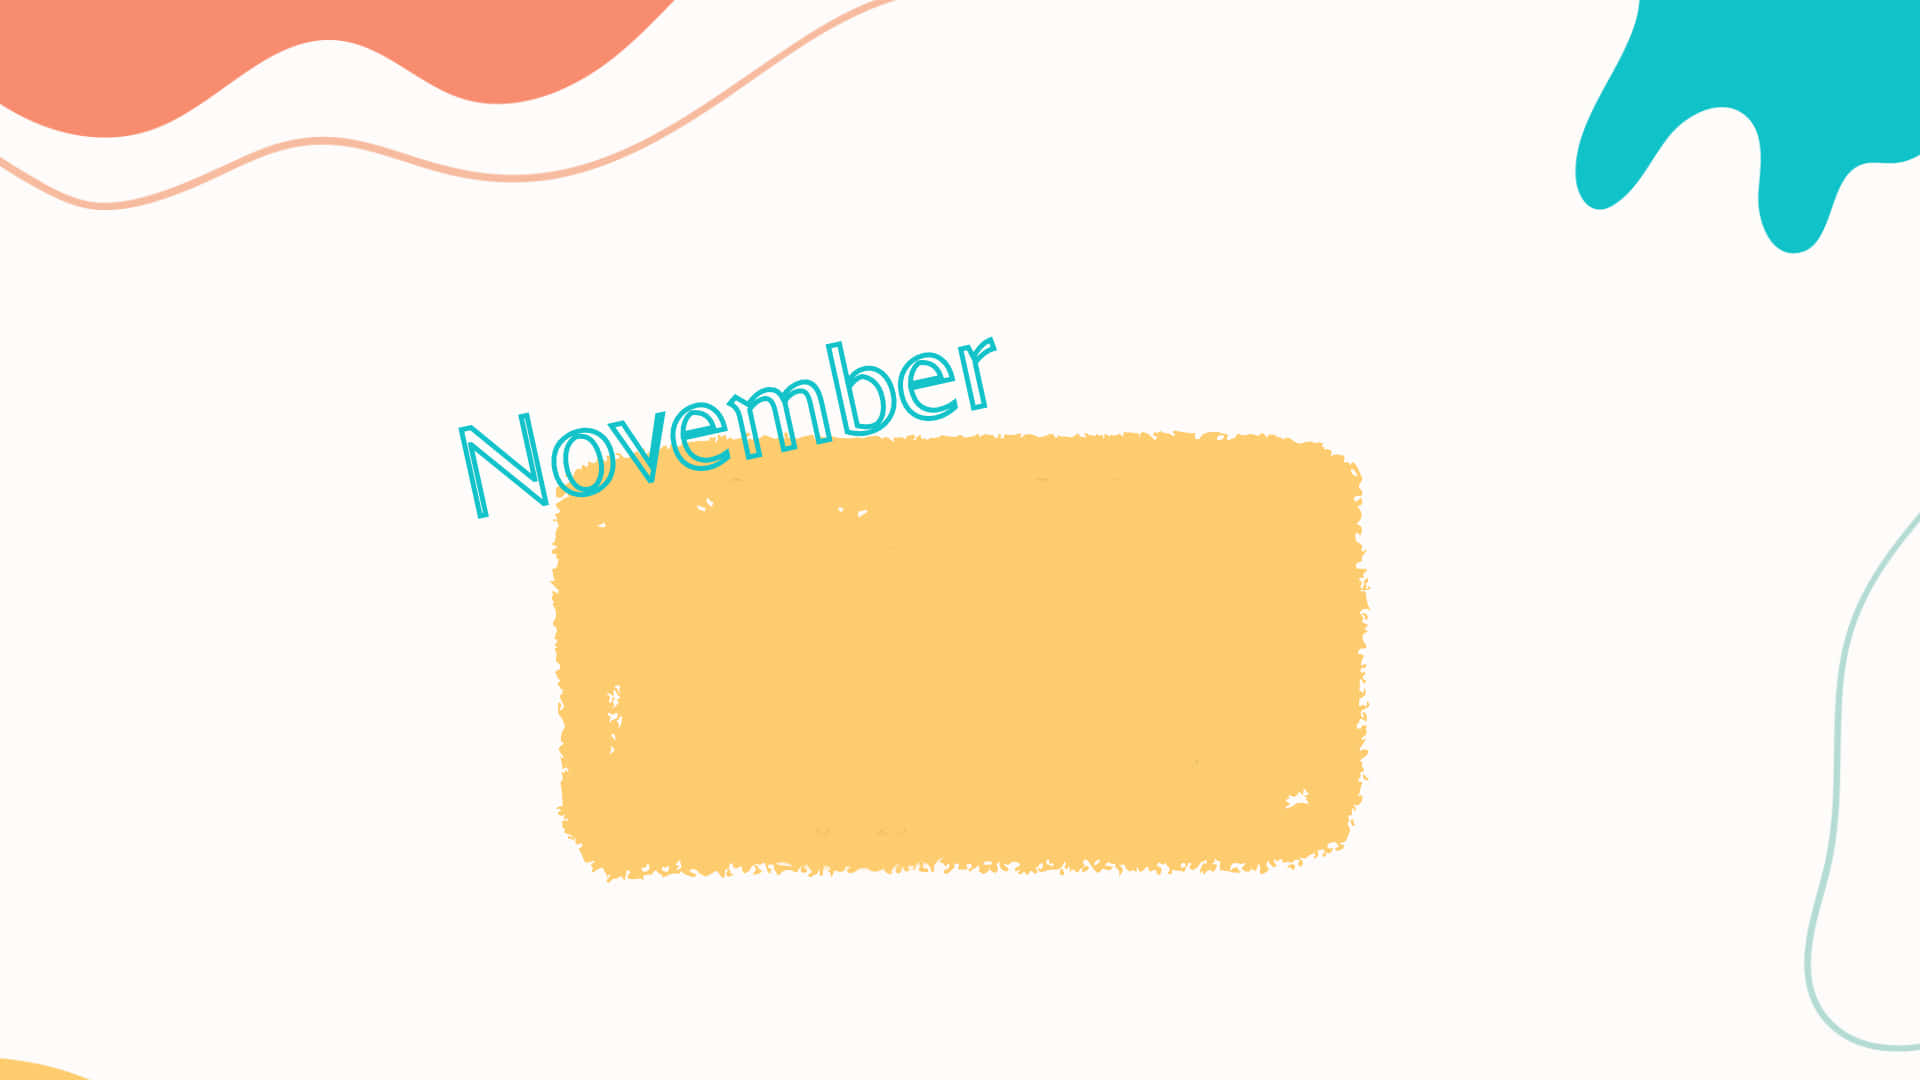 "Experience the magic of Aesthetic November" Wallpaper